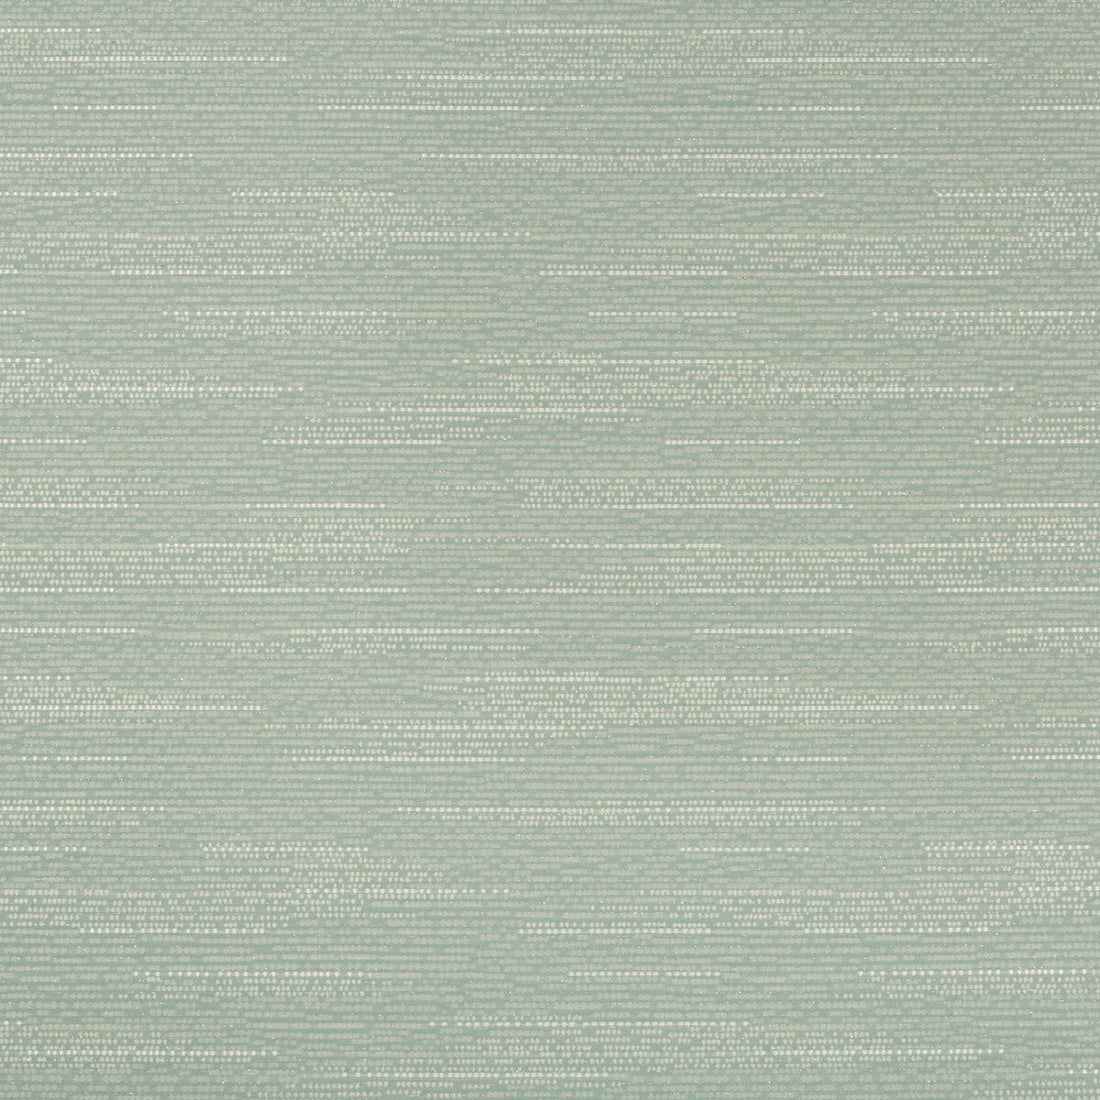 Waterline fabric in sea green color - pattern 32934.135.0 - by Kravet Contract in the Gis Crypton collection